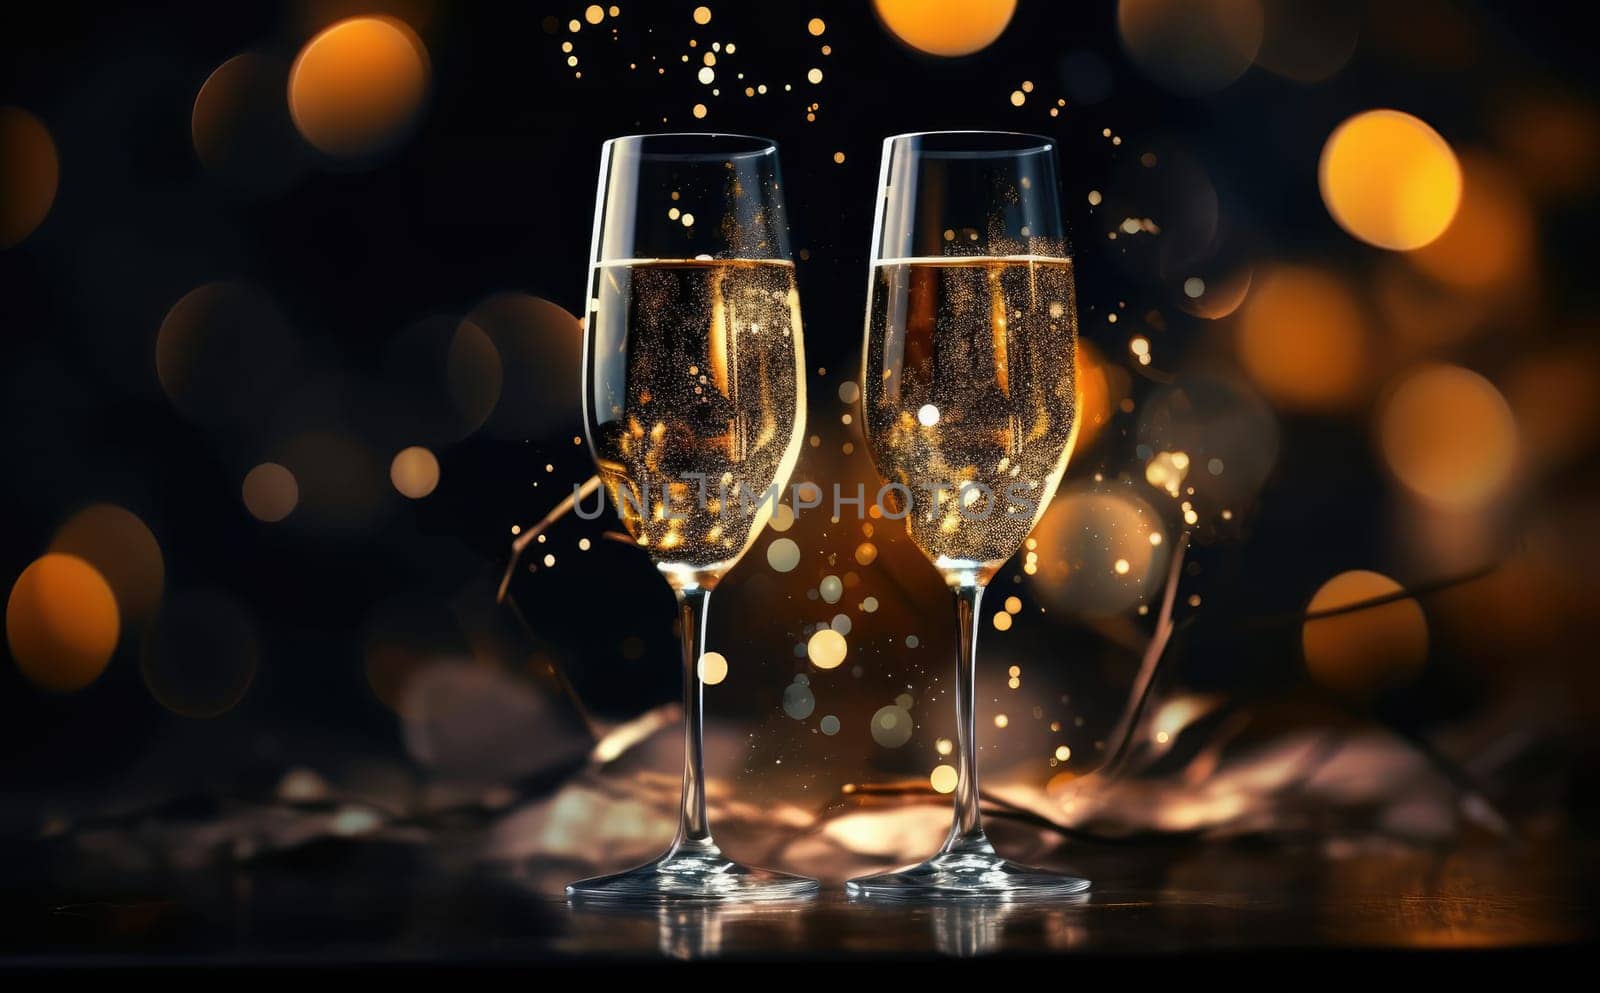 Two champagne glasses on a blurred gold background by cherezoff